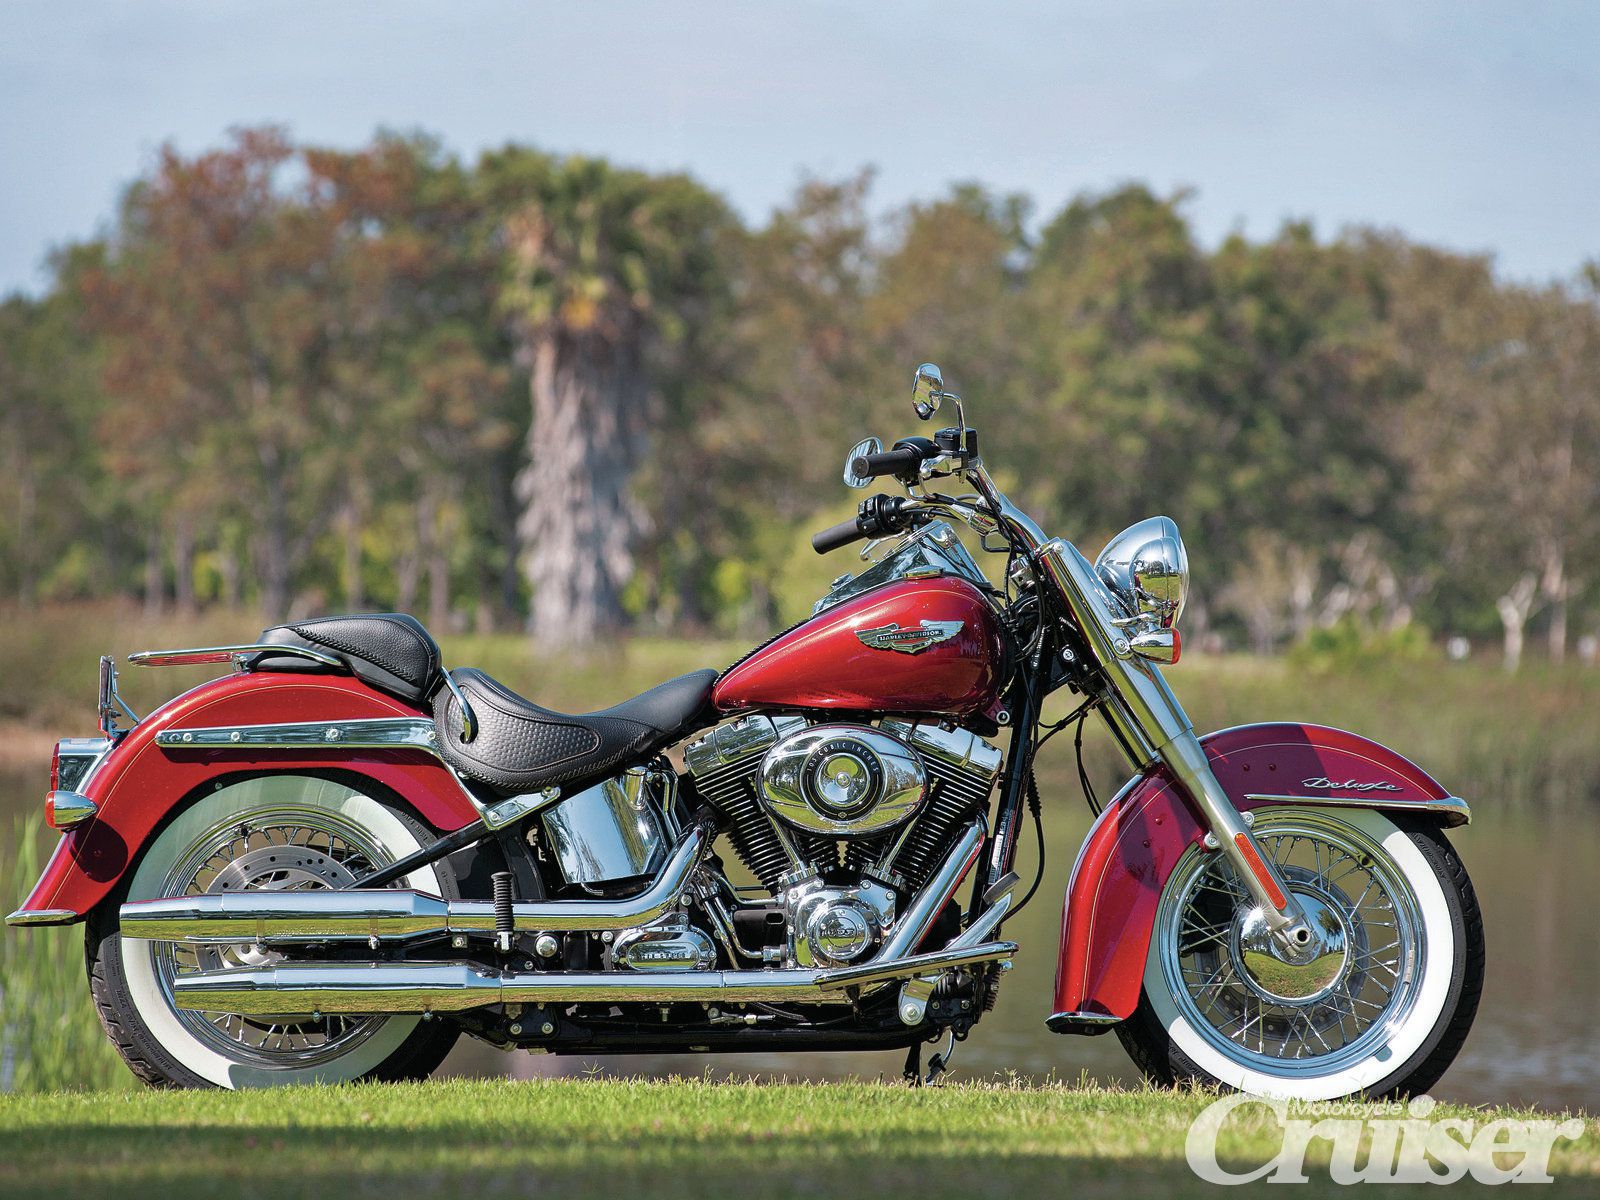 2012 Indian Motorcycle - First Look Review